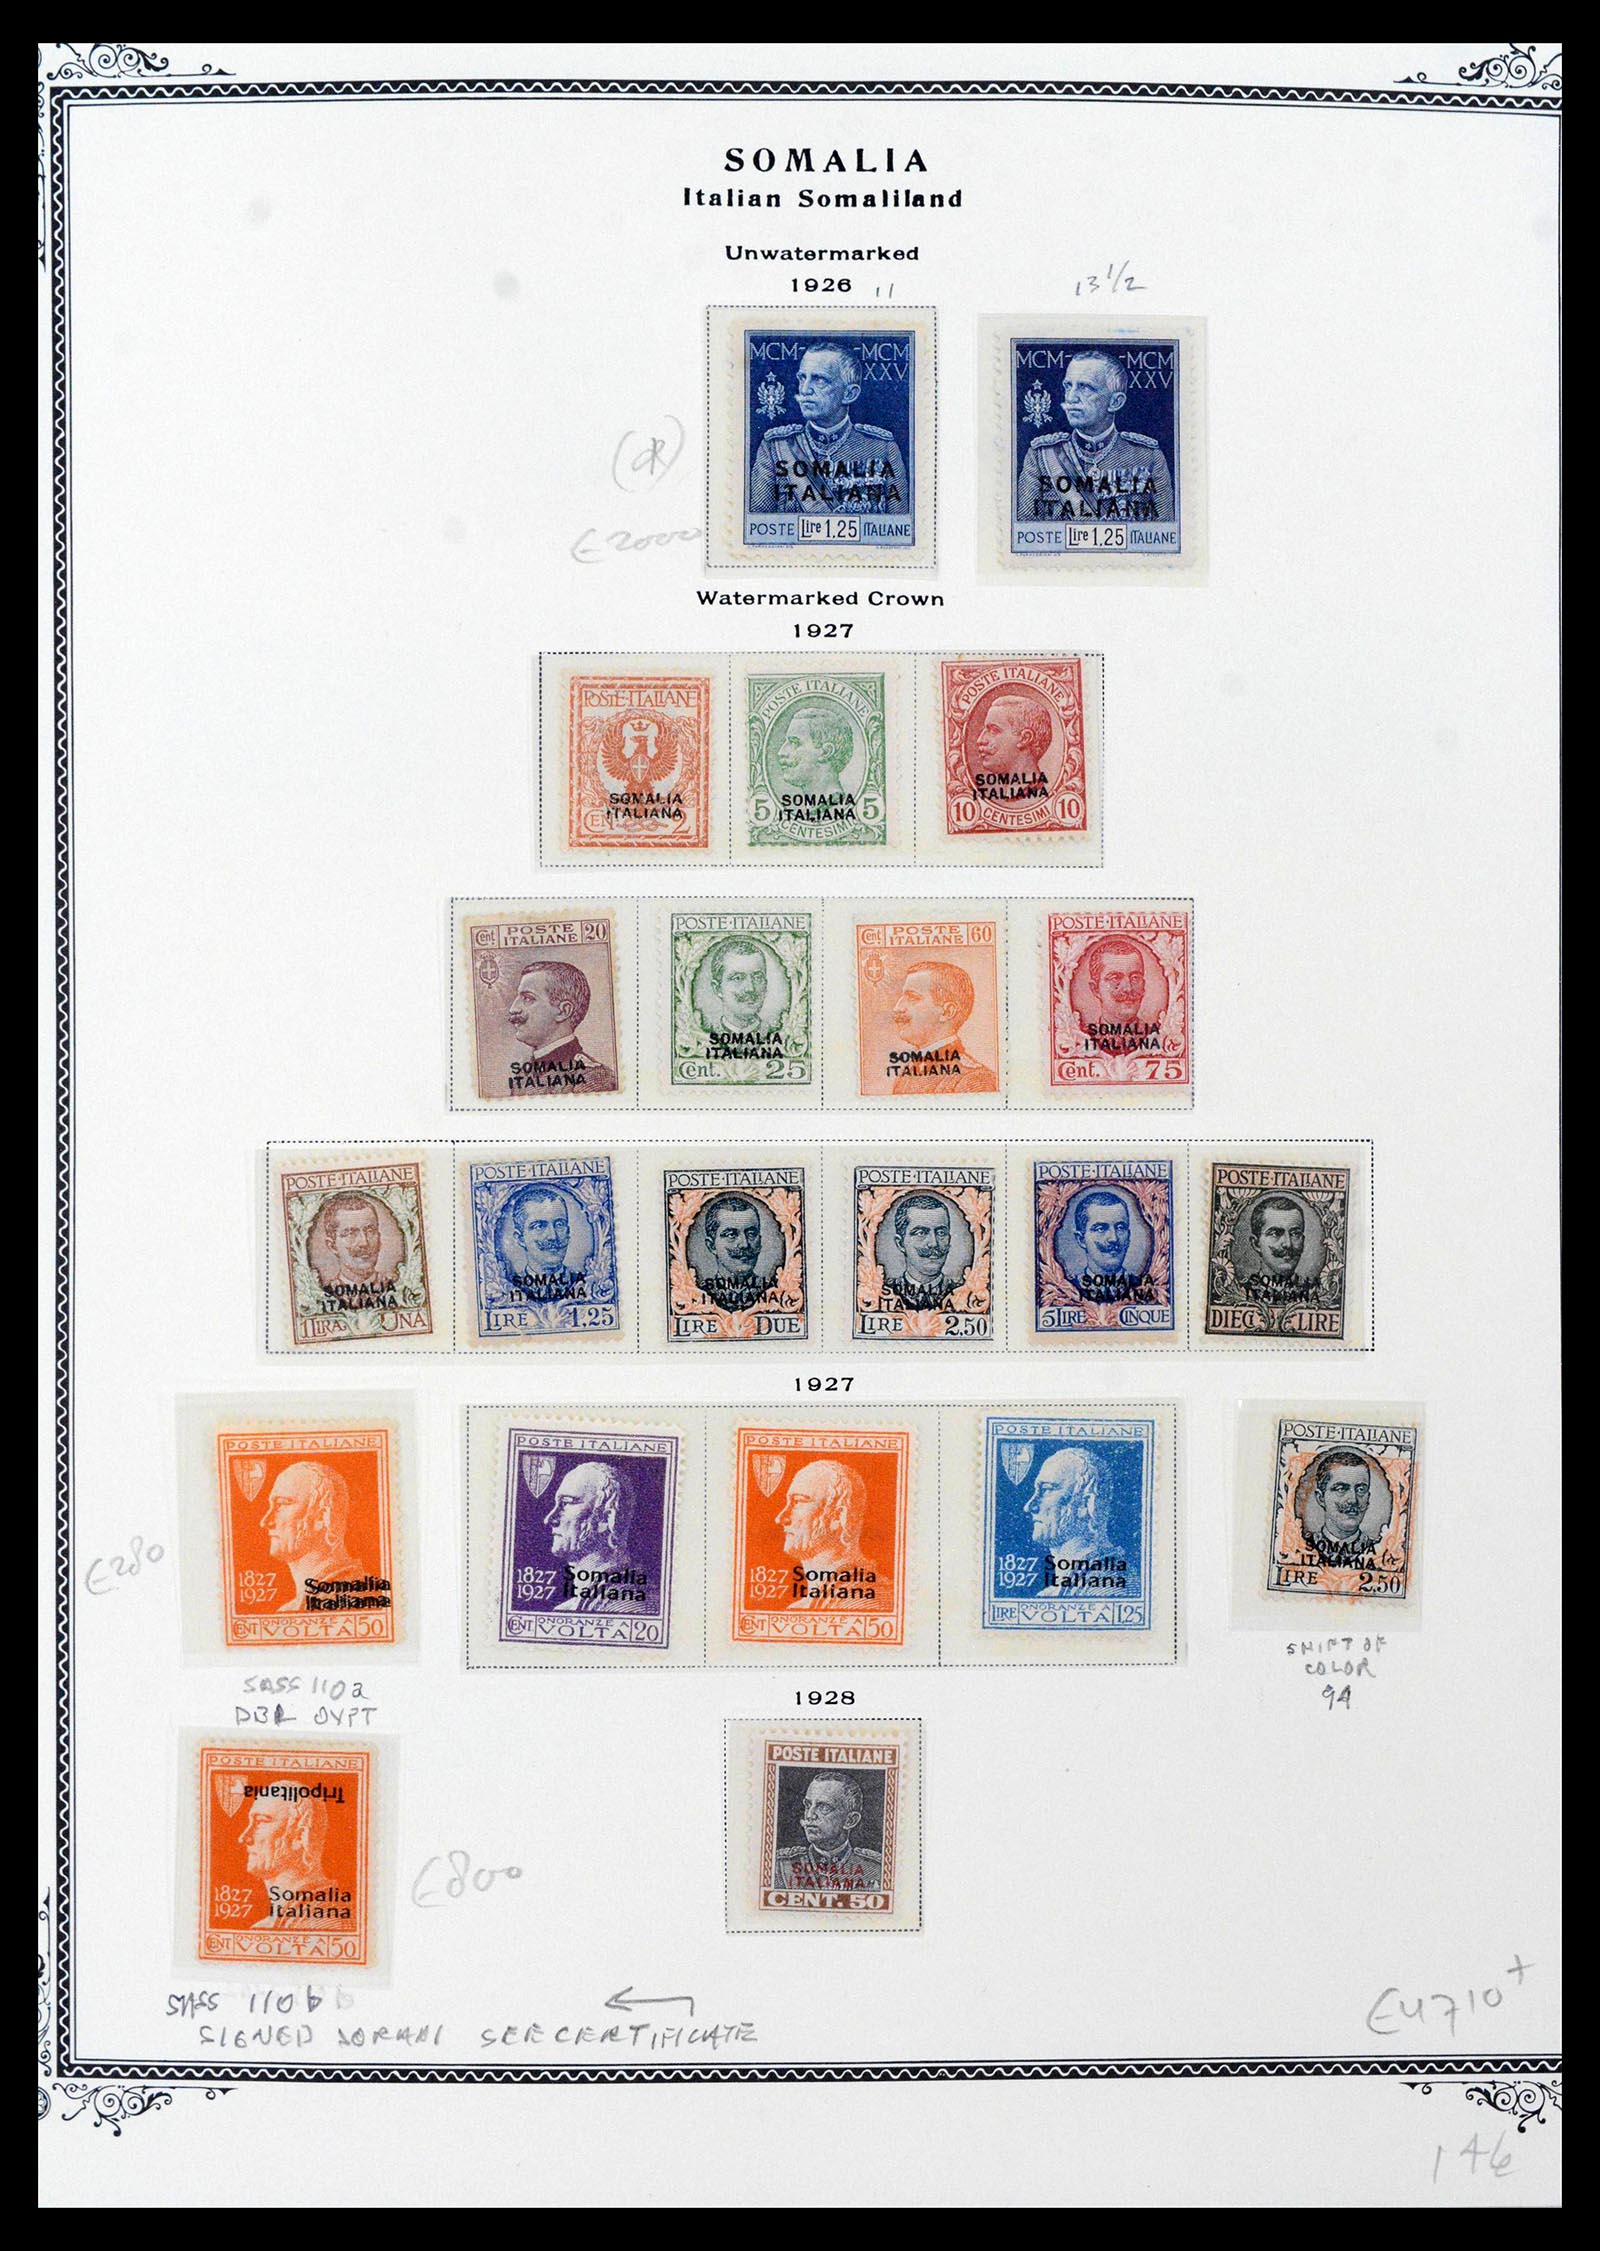 39011 0008 - Stamp collection 39011 Somalia complete 1903-1960.